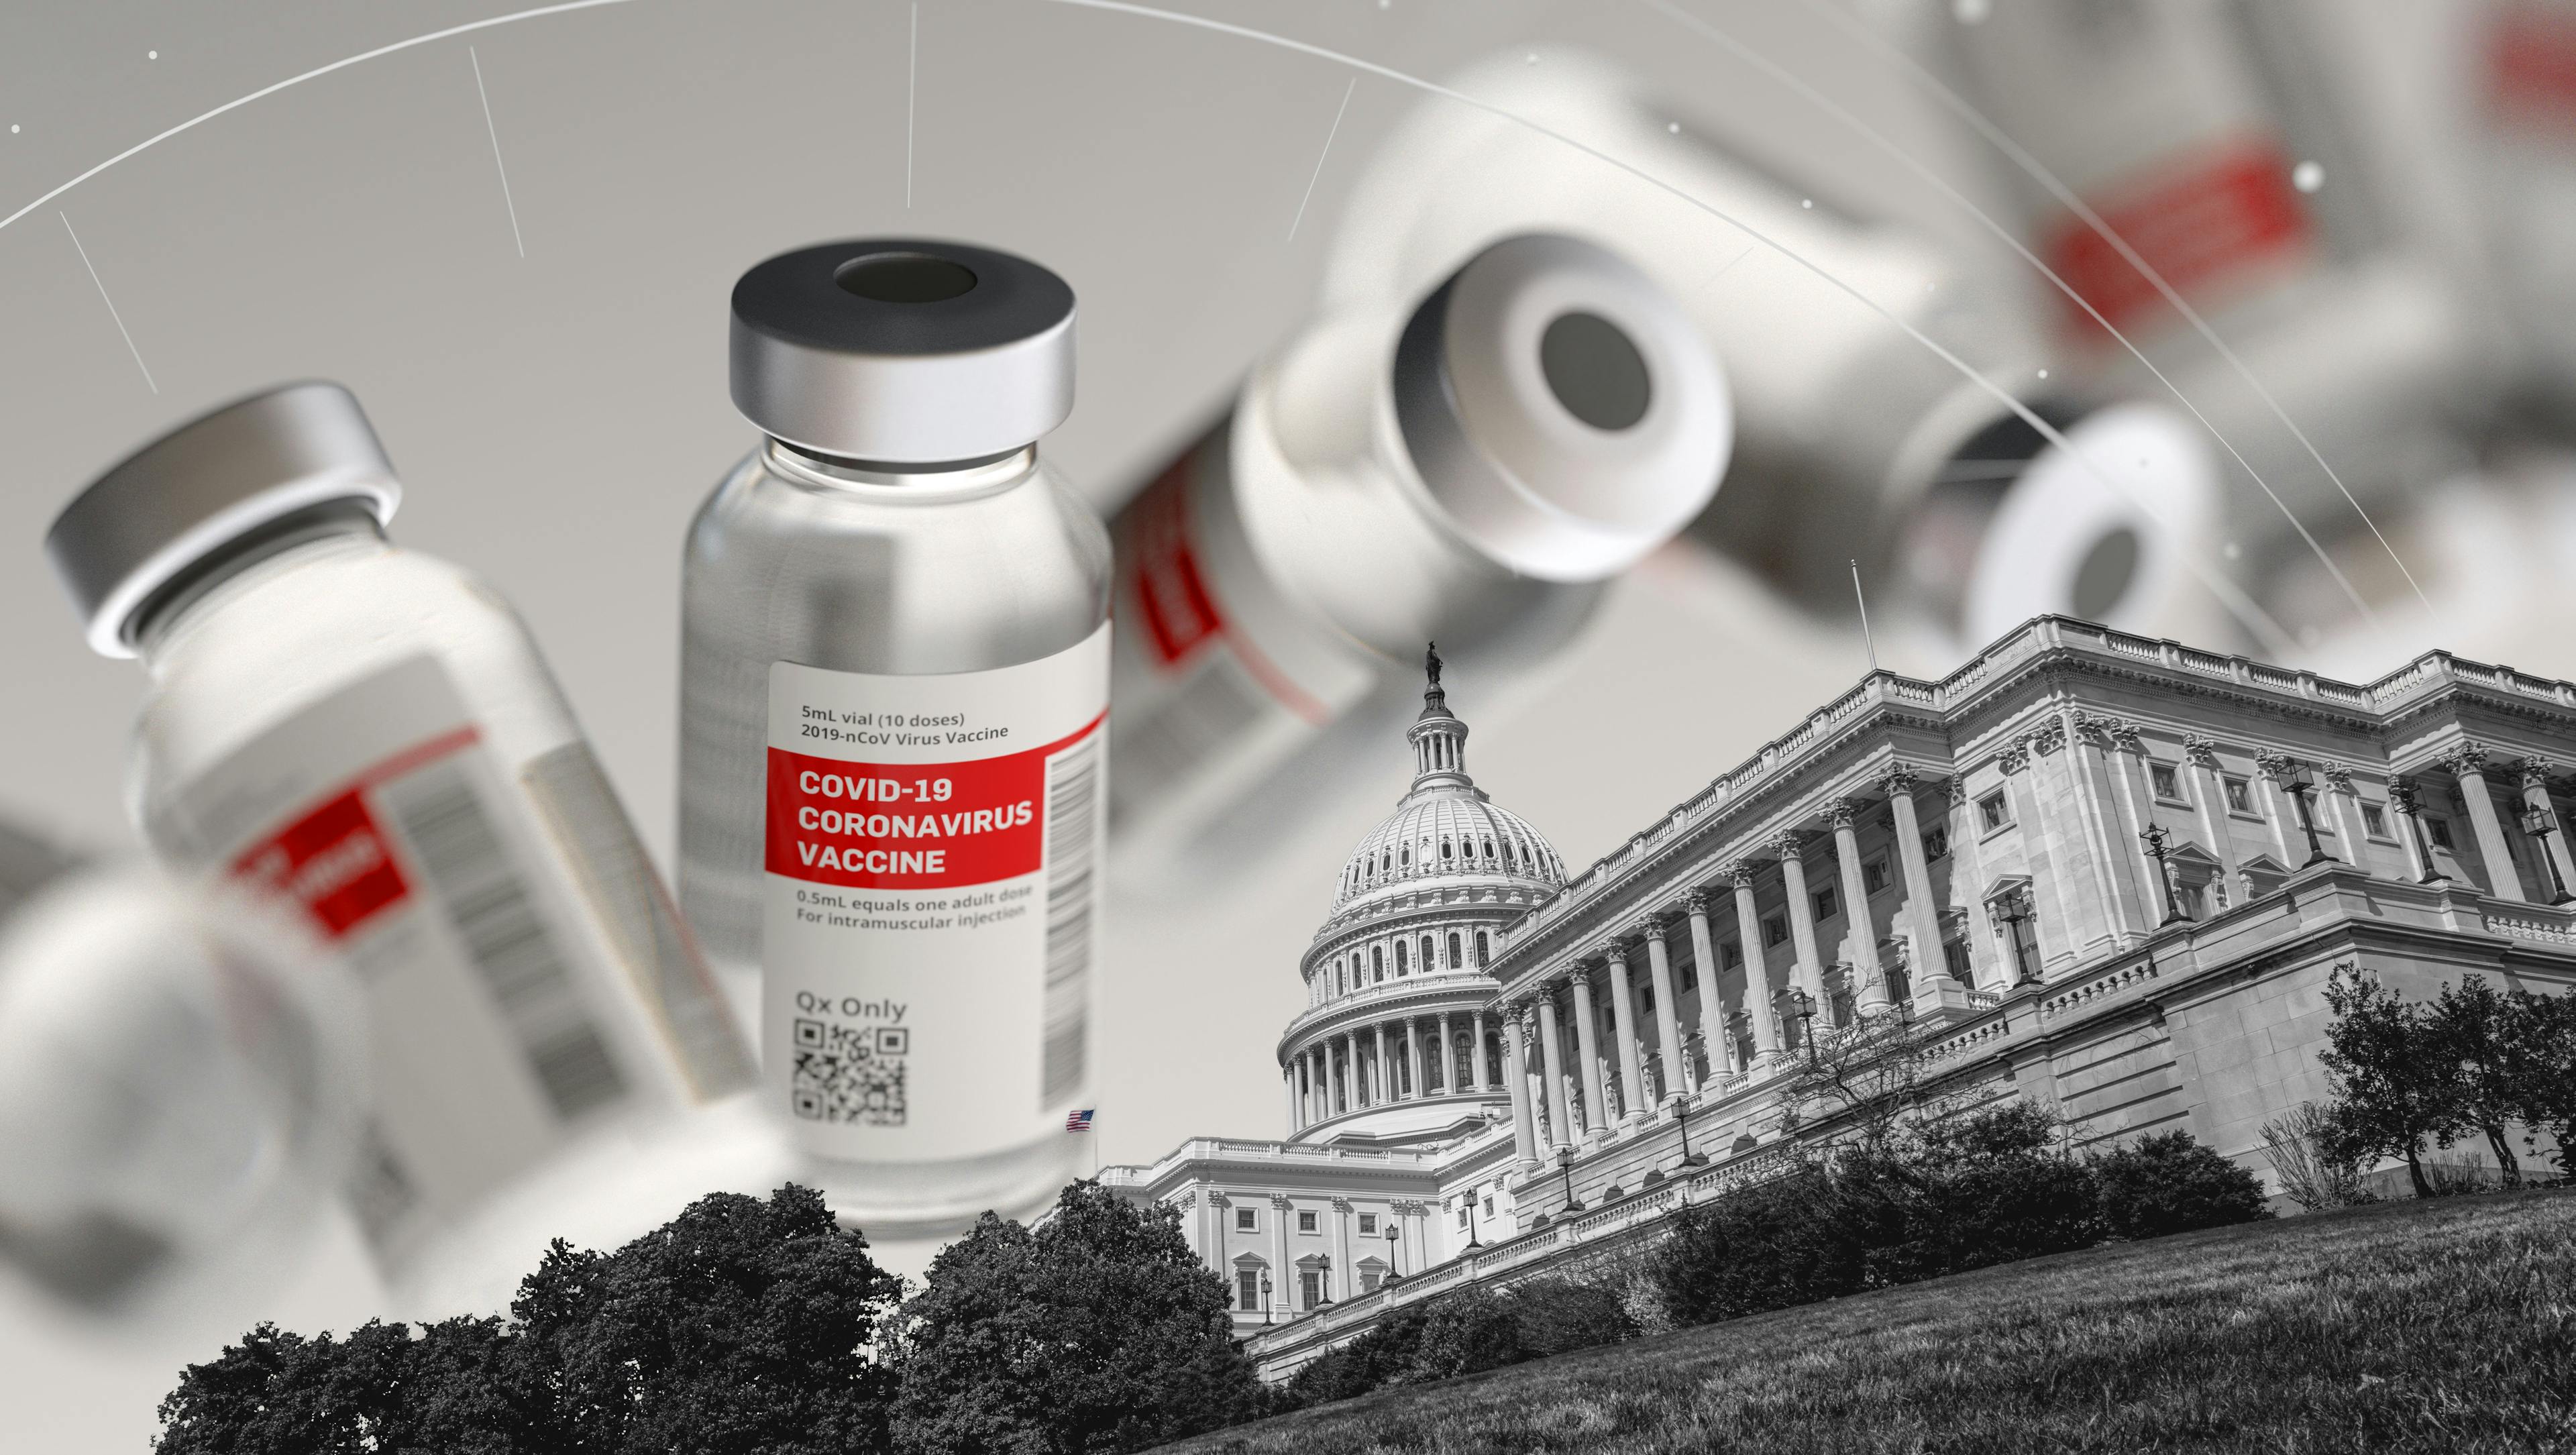 More Republicans Died After COVID-19 Vaccines Were Available Than Democrats